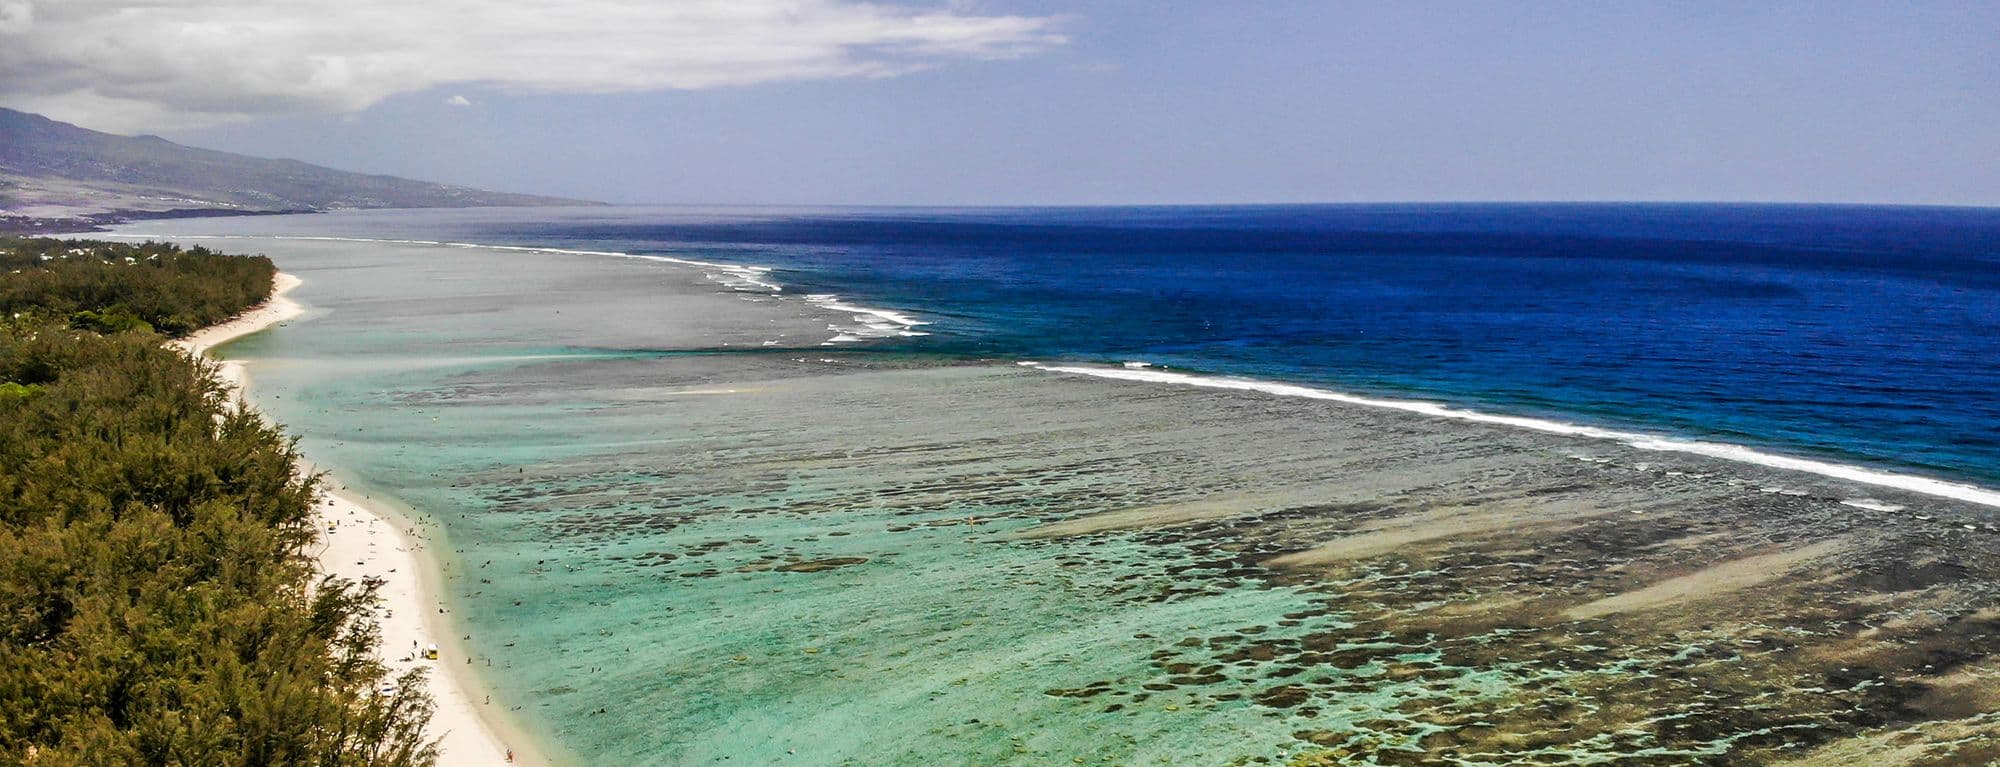 Reunion Island - Pléiades Neo Enables Live Coral Detection and Mapping banner